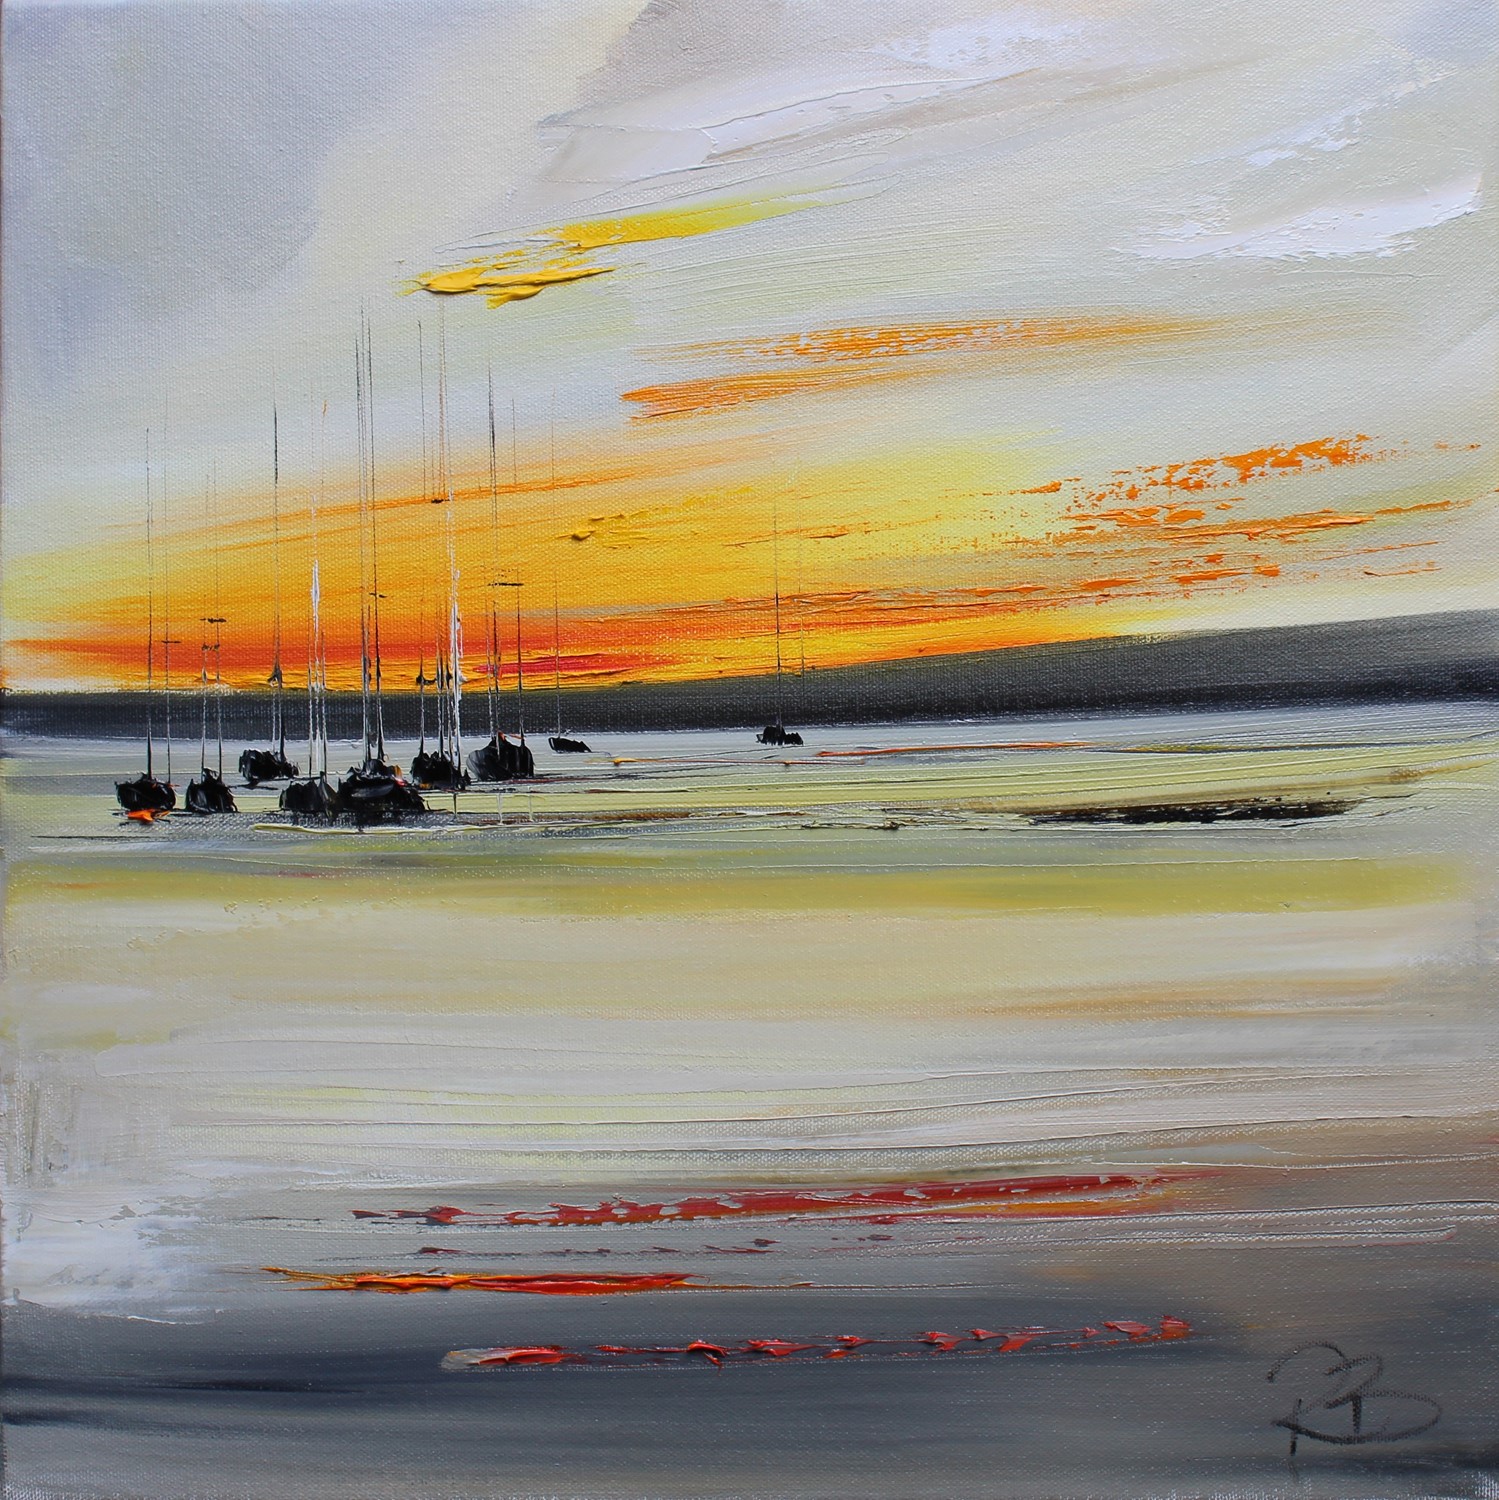 'Resting at Sunset' by artist Rosanne Barr